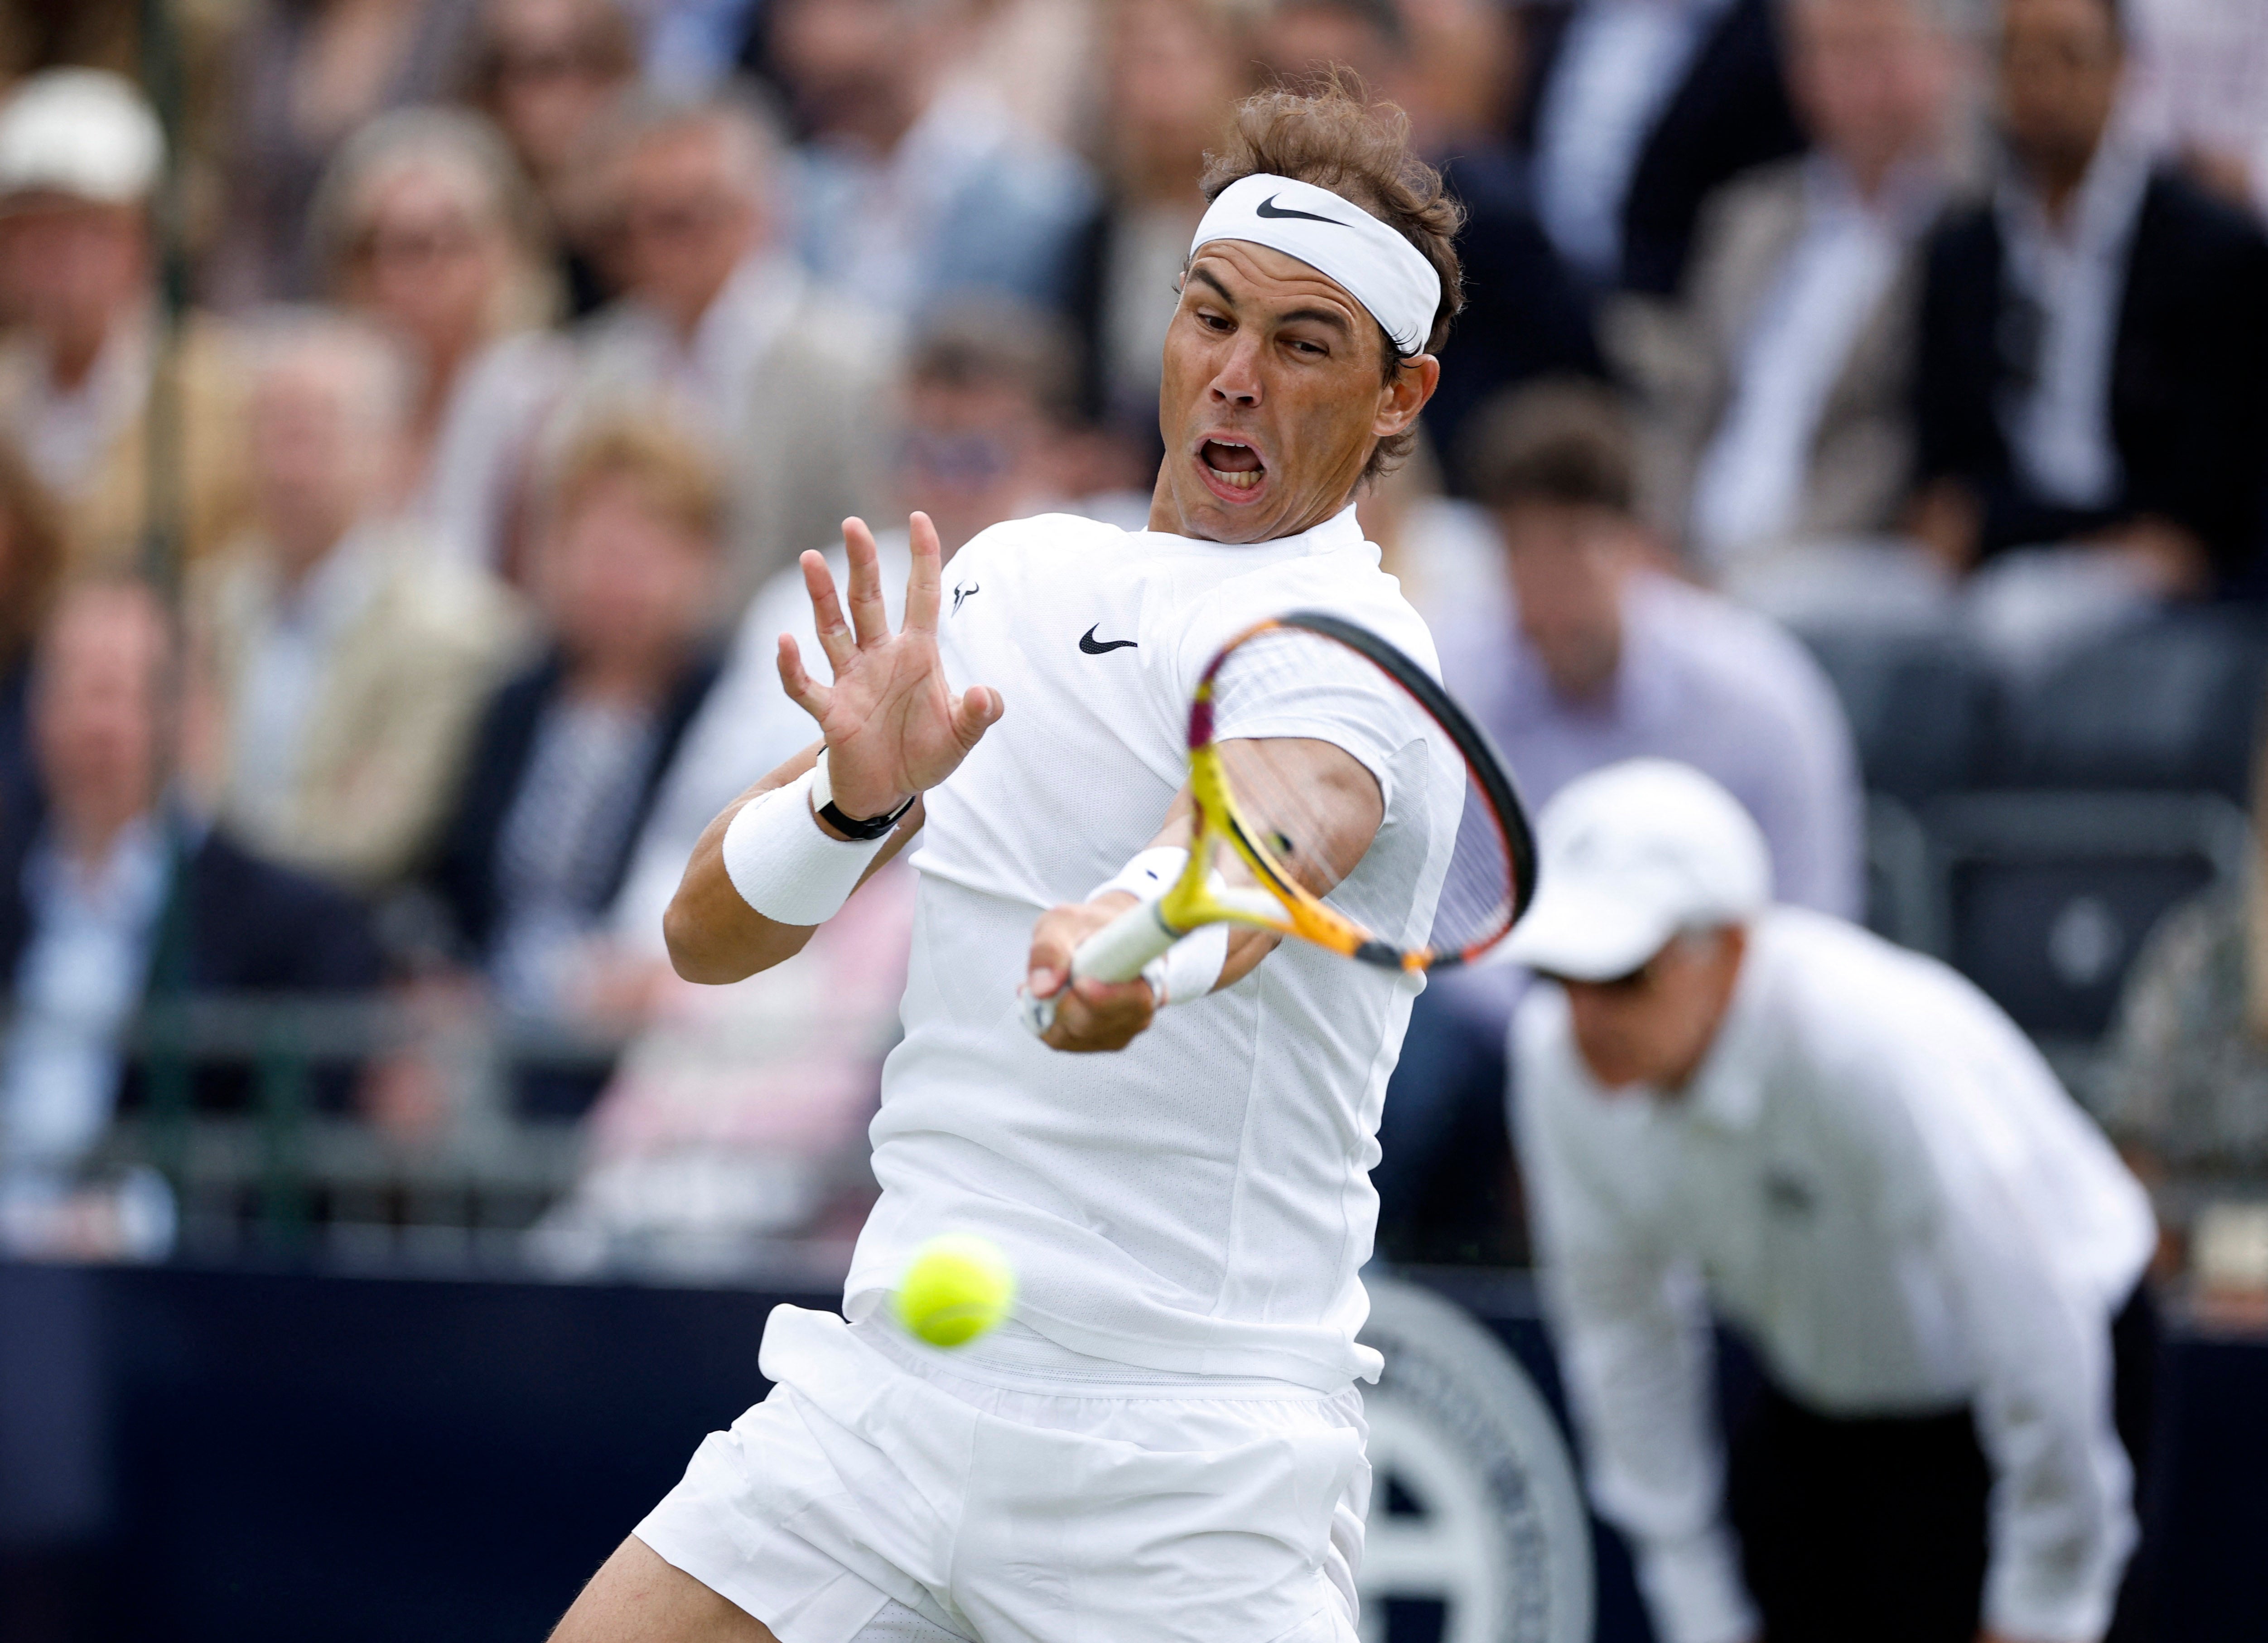 Rafael Nadal vs Felix Auger-Aliassime LIVE Tennis result from Hurlingham Club as Nadal loses The Independent